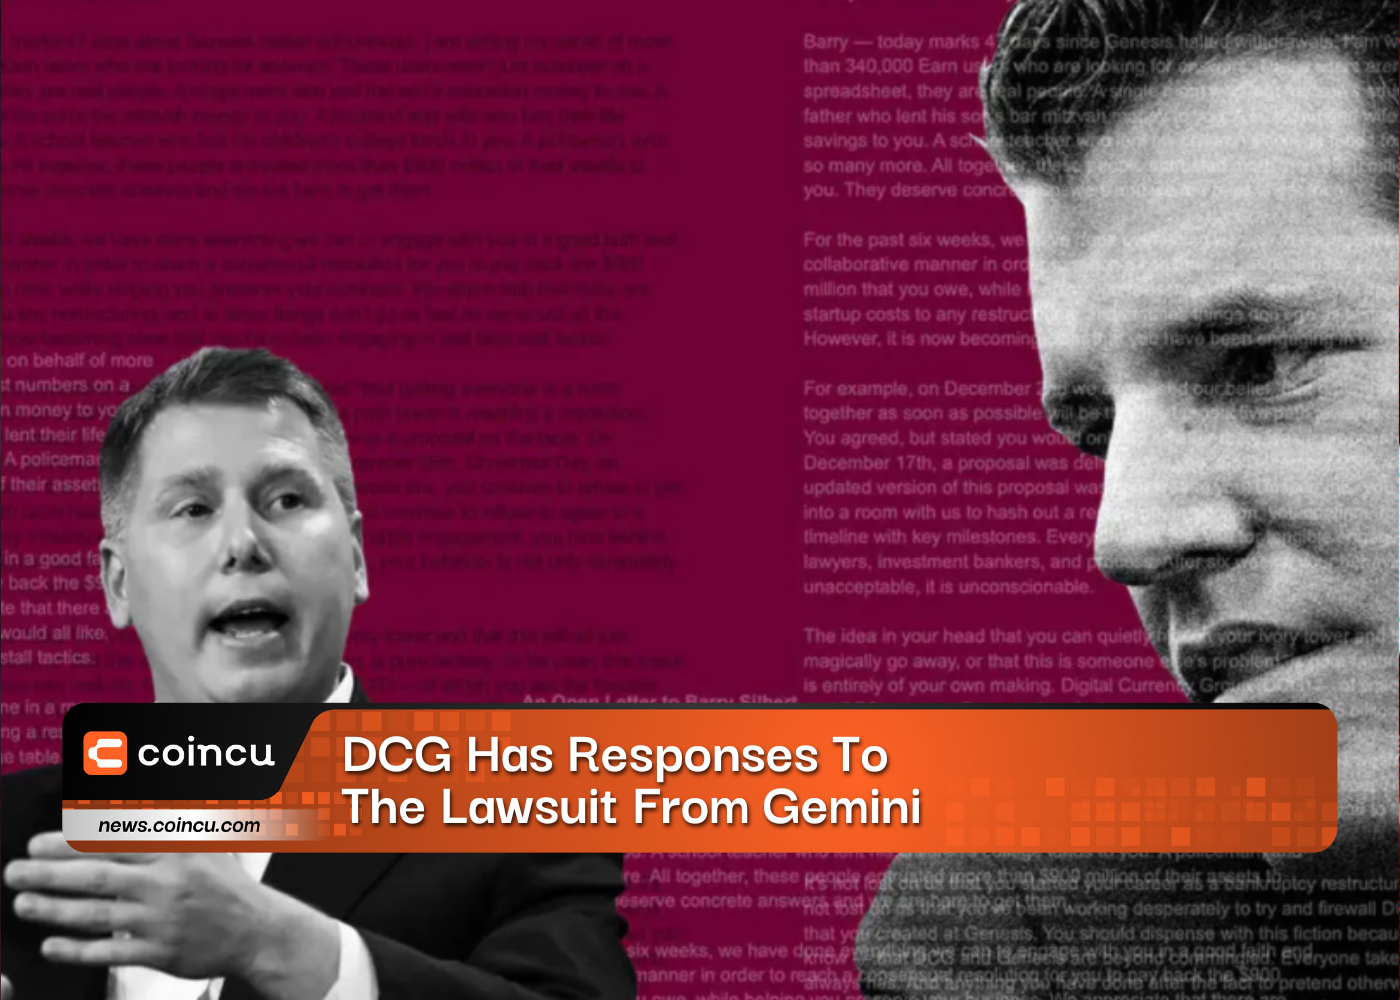 DCG Has Responses To The Lawsuit From Gemini